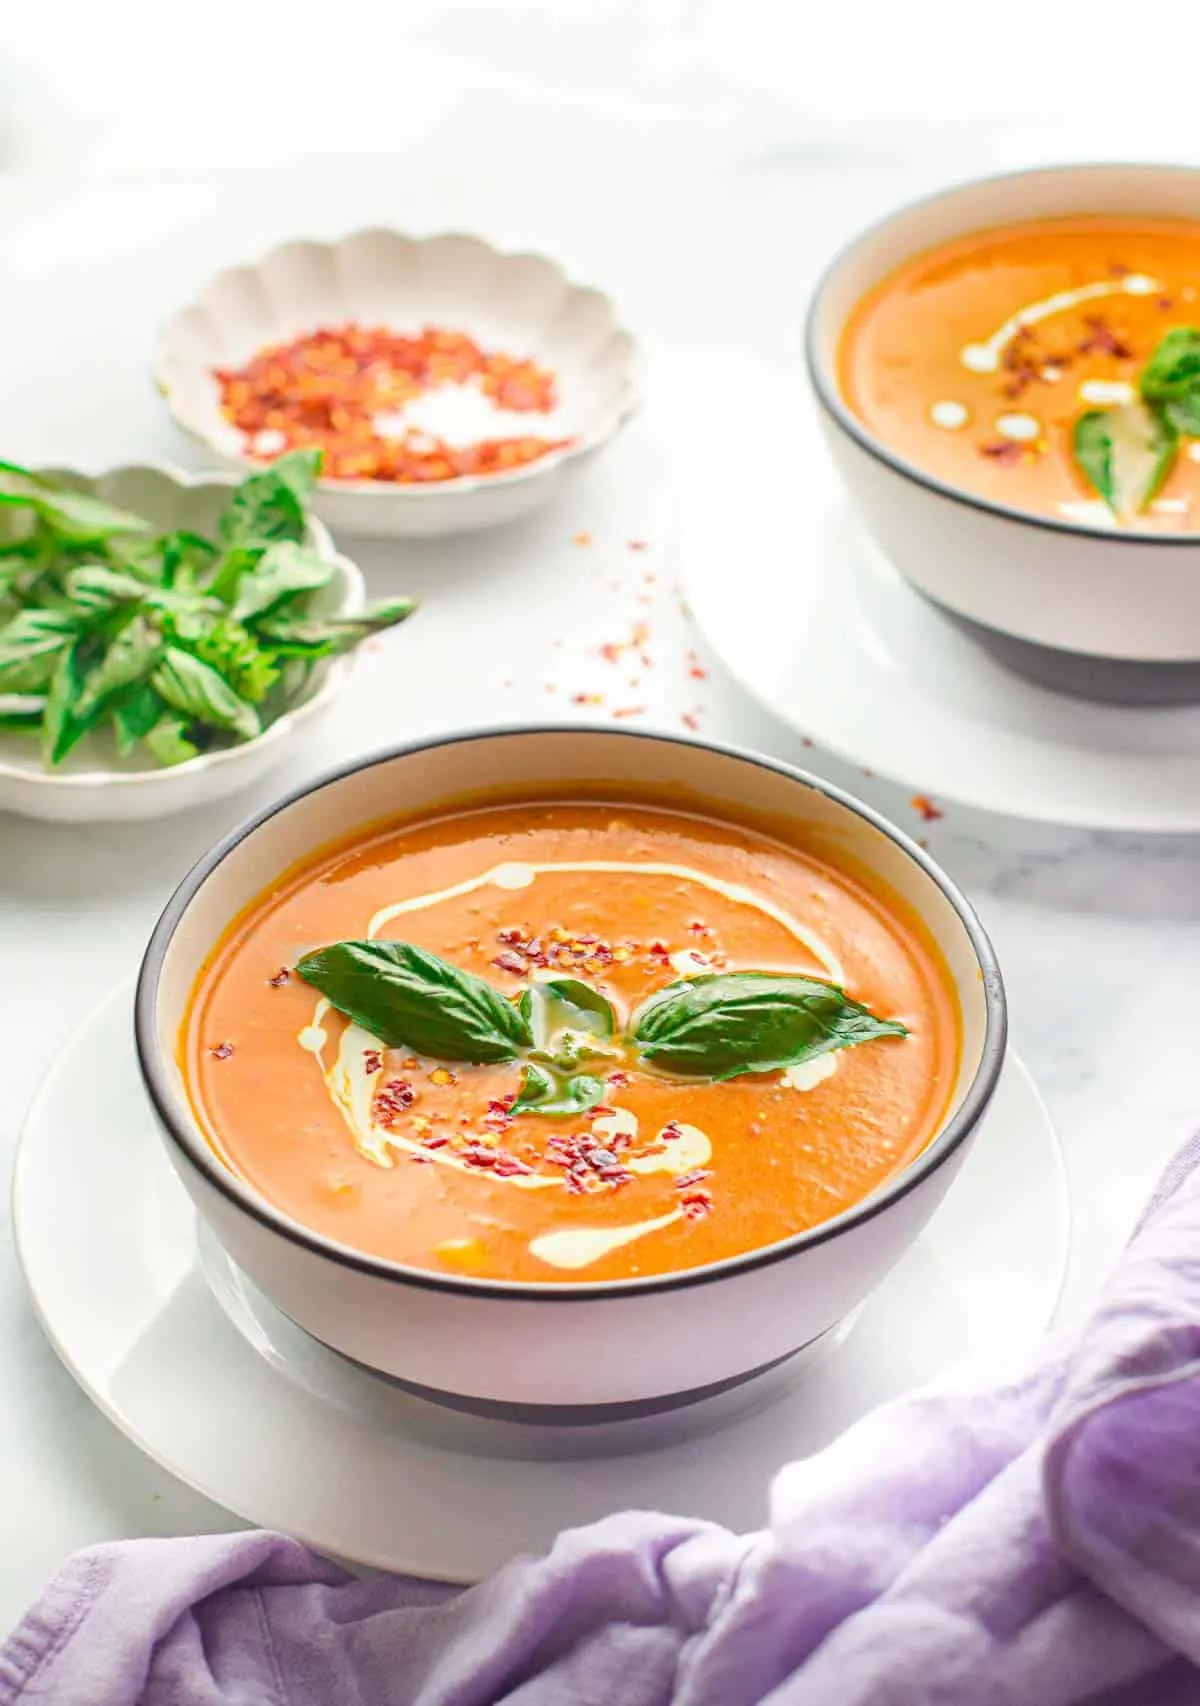 Two bowls of tomato soup topped with basil leaves.